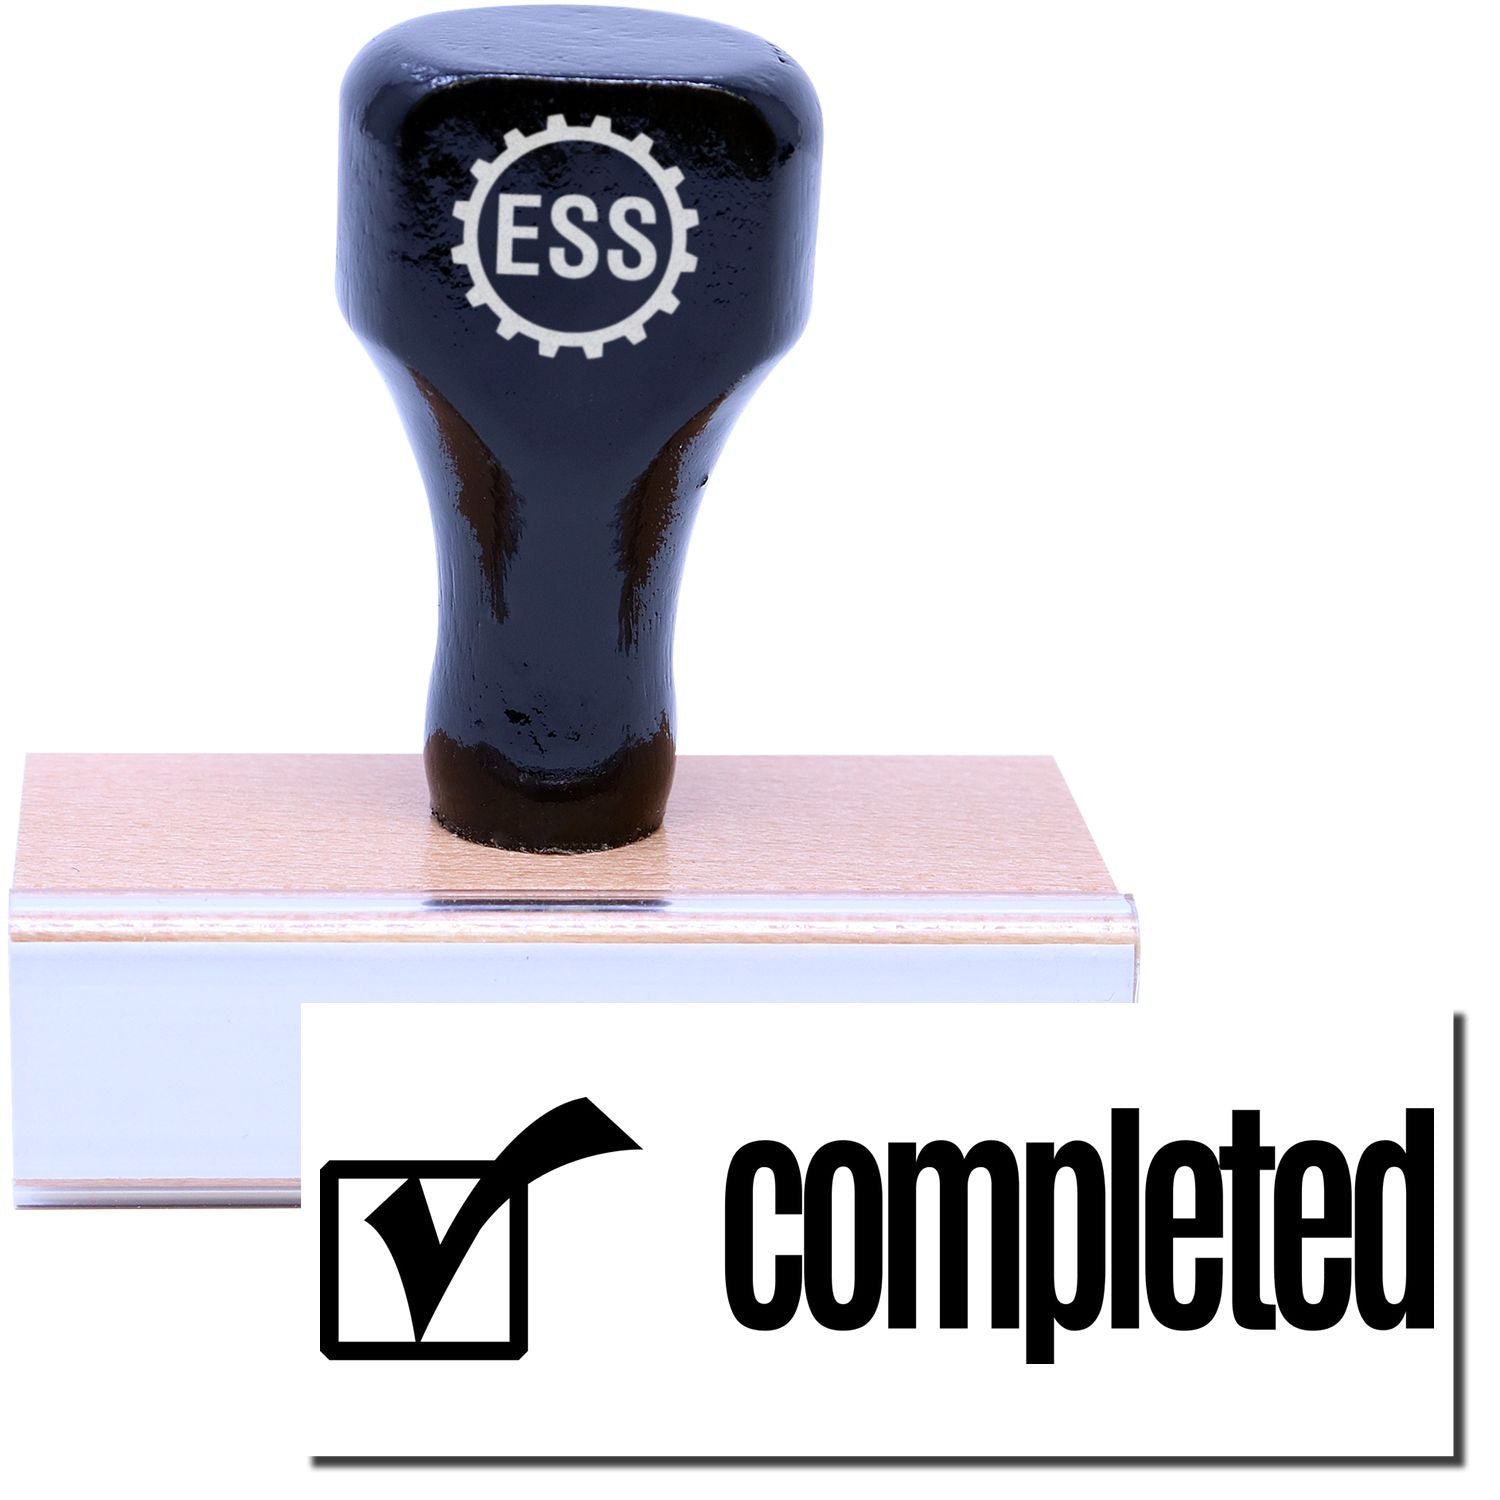 A stock office rubber stamp with a stamped image showing how the text "completed" with a checkbox icon on the left side is displayed after stamping.